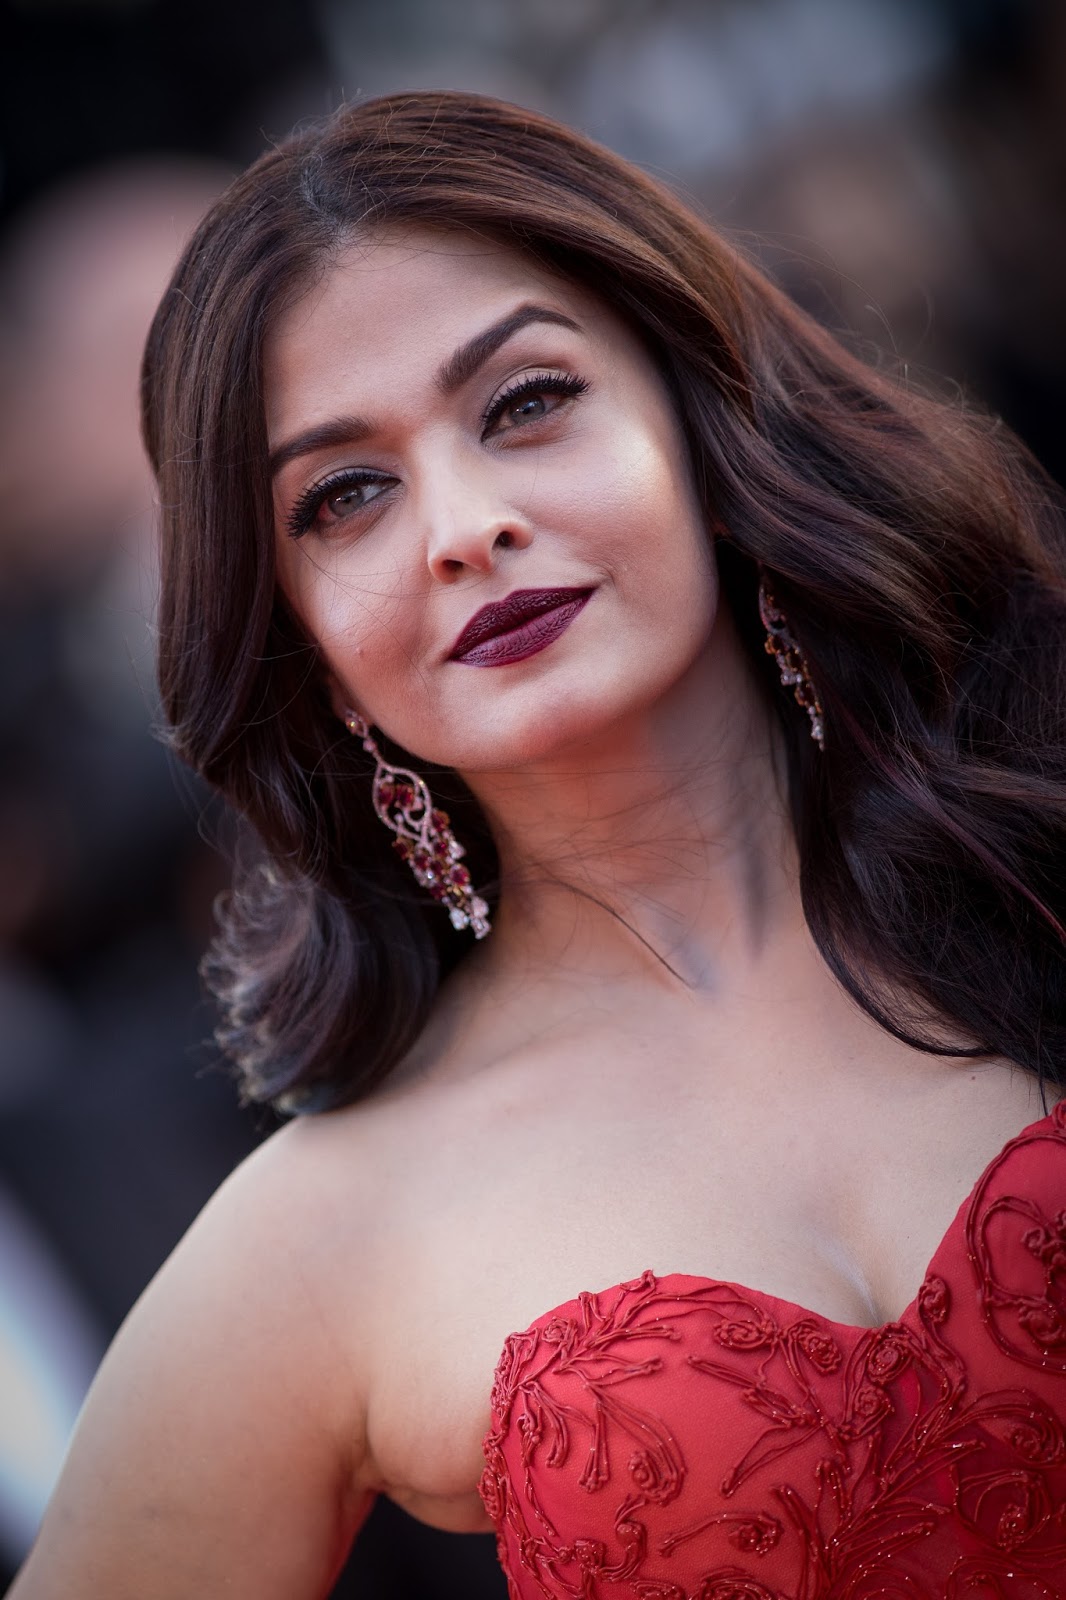 Aishwarya Rai Bachchan Looks Ravishing in a Ralph & Russo Red Gown At '120 Beats Per Minute (120 Battements Par Minute)' Premiere During The 70th Cannes Film Festival 2017